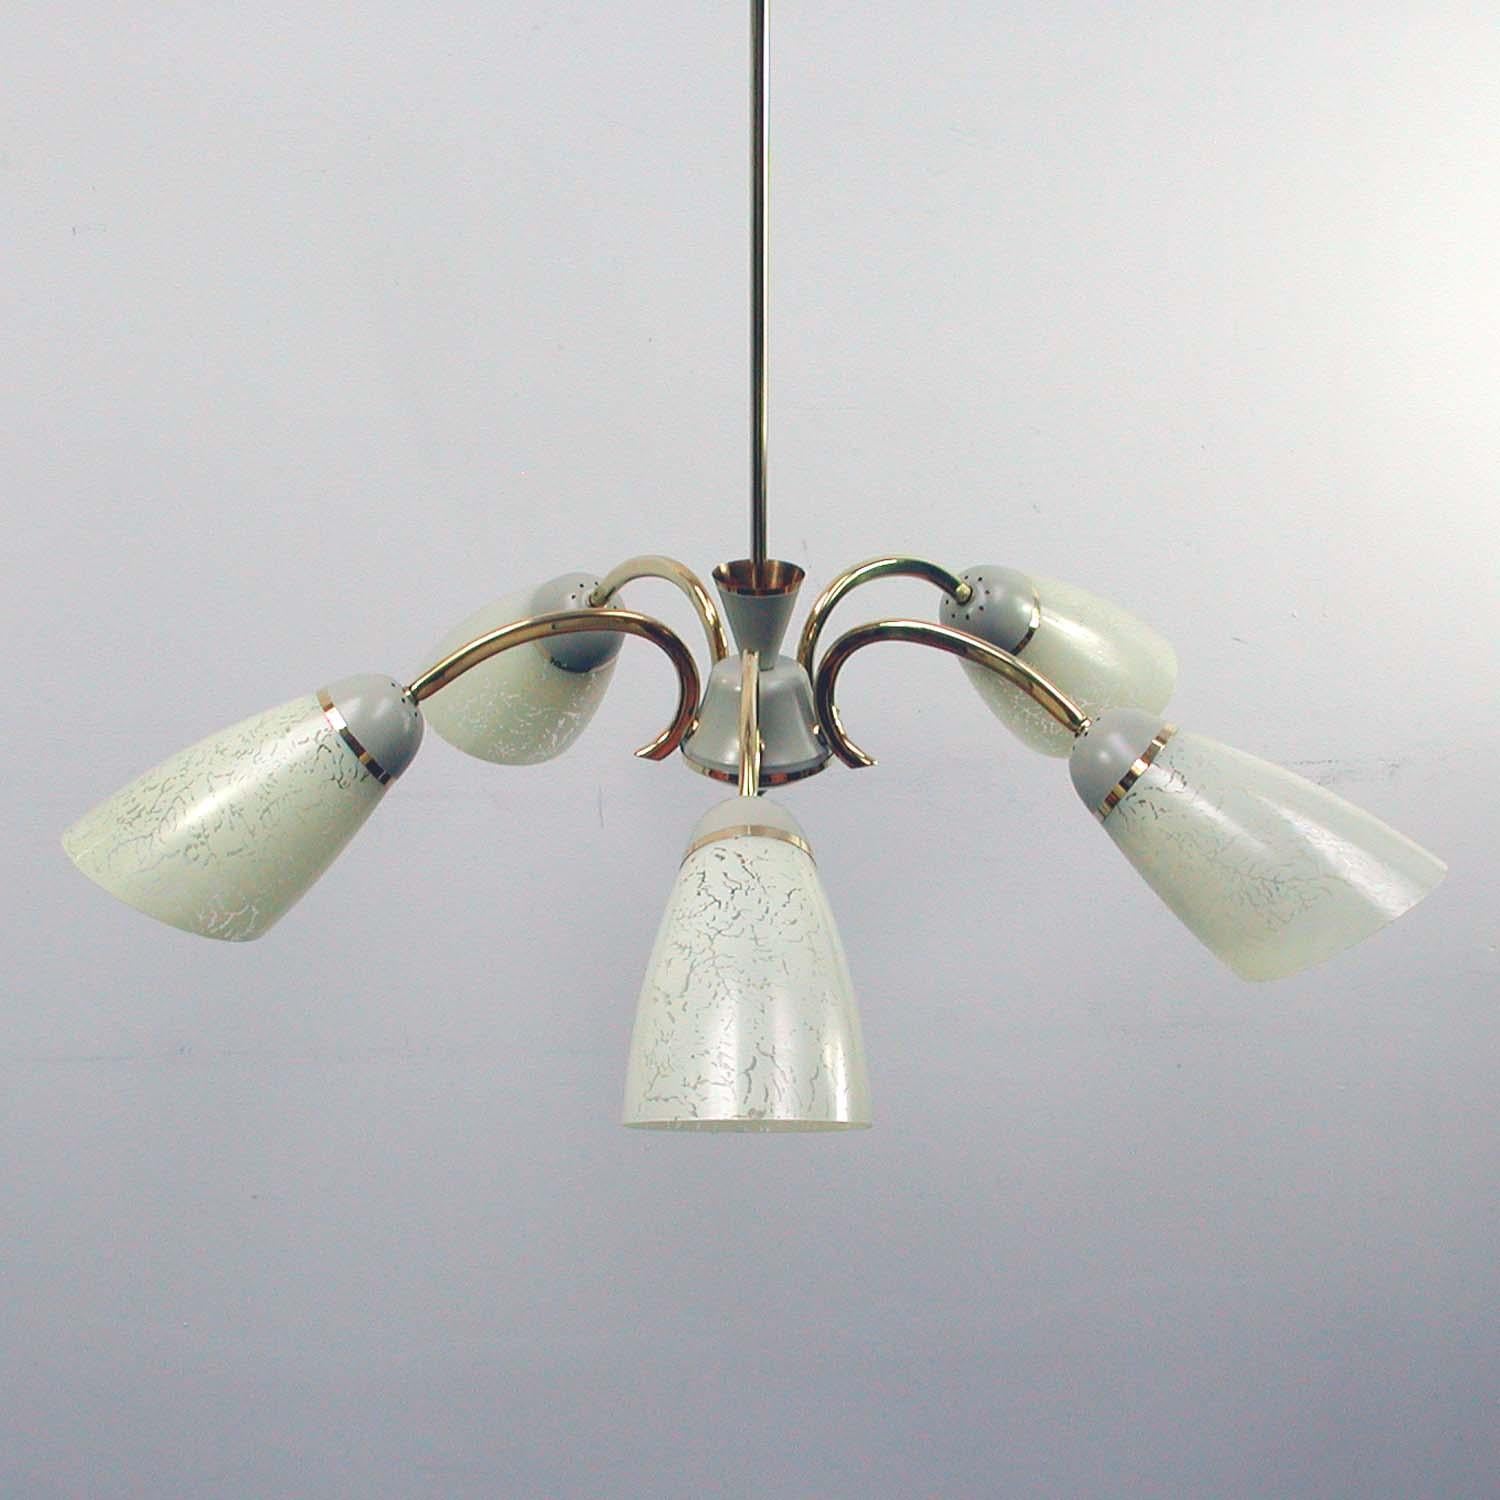 This German five armed sputnik chandelier from the 1950s is made of brass and grey lacquered metal and has got 5 cream glass lamp shades. The lamp works on 220V as well as 110V and requires standard E14 Edison screw on bulbs. The lamp is in a very